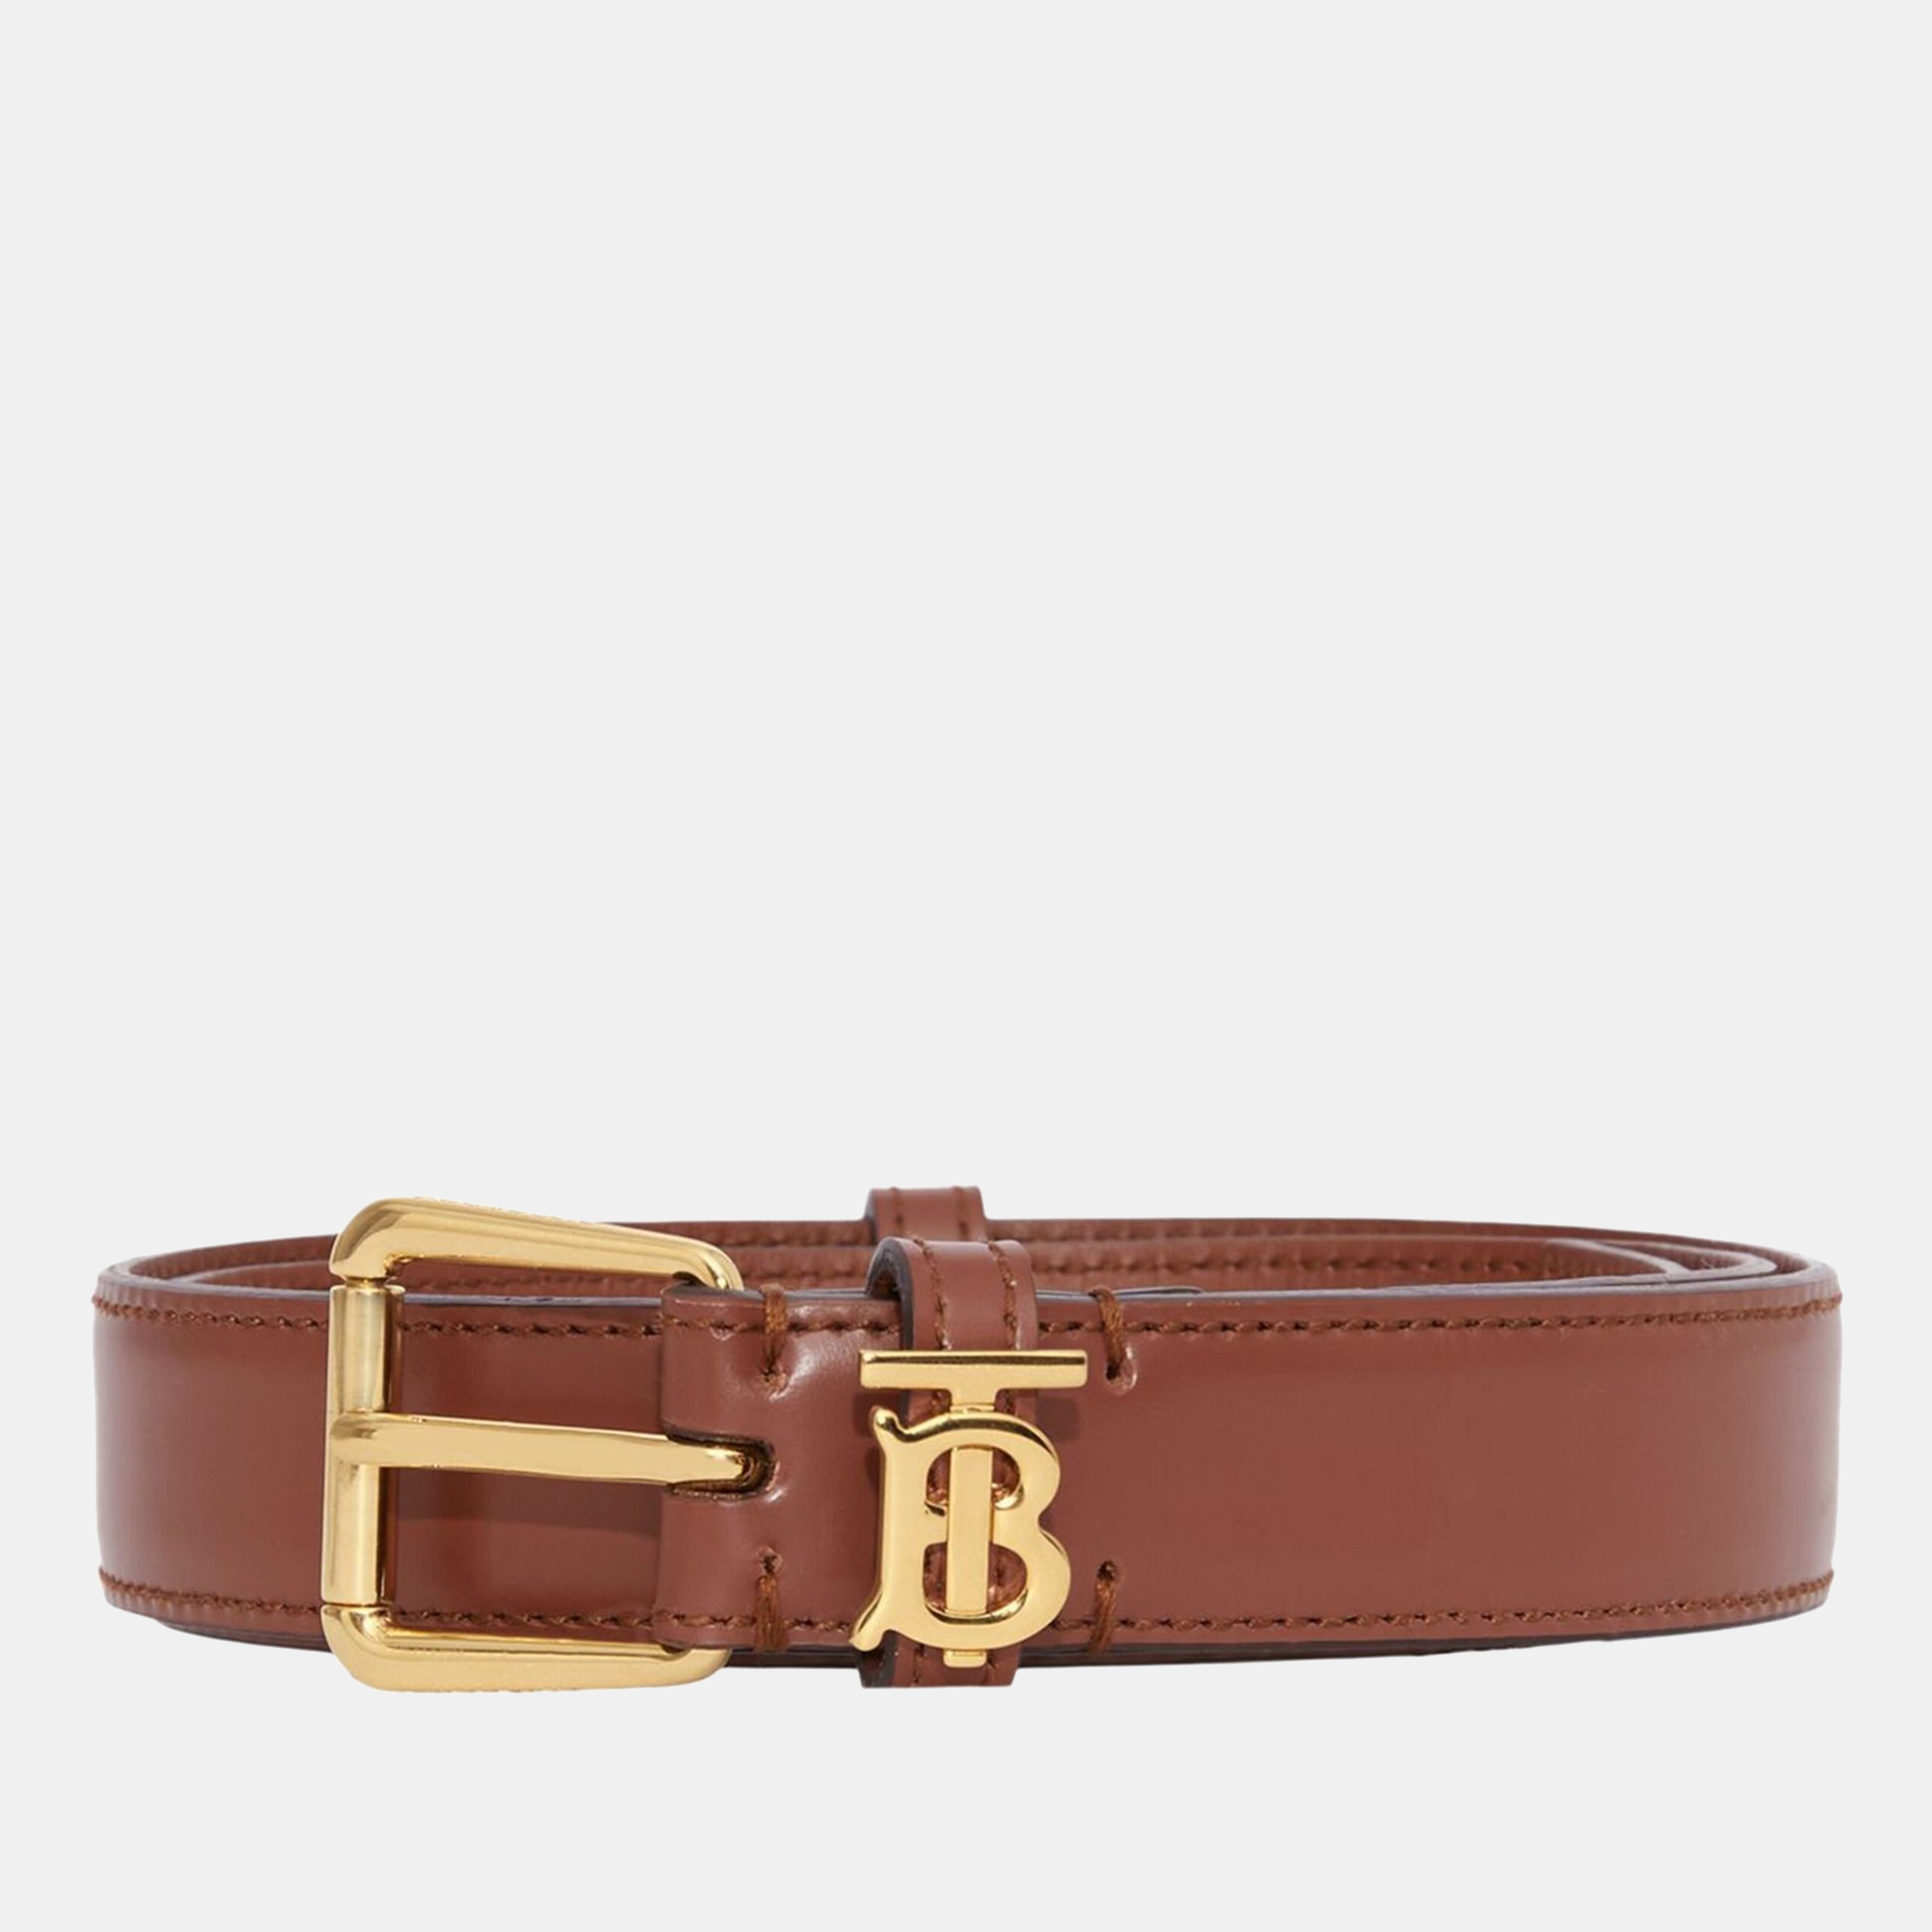 Pre-owned Burberry Tan Leather Tb Belt M